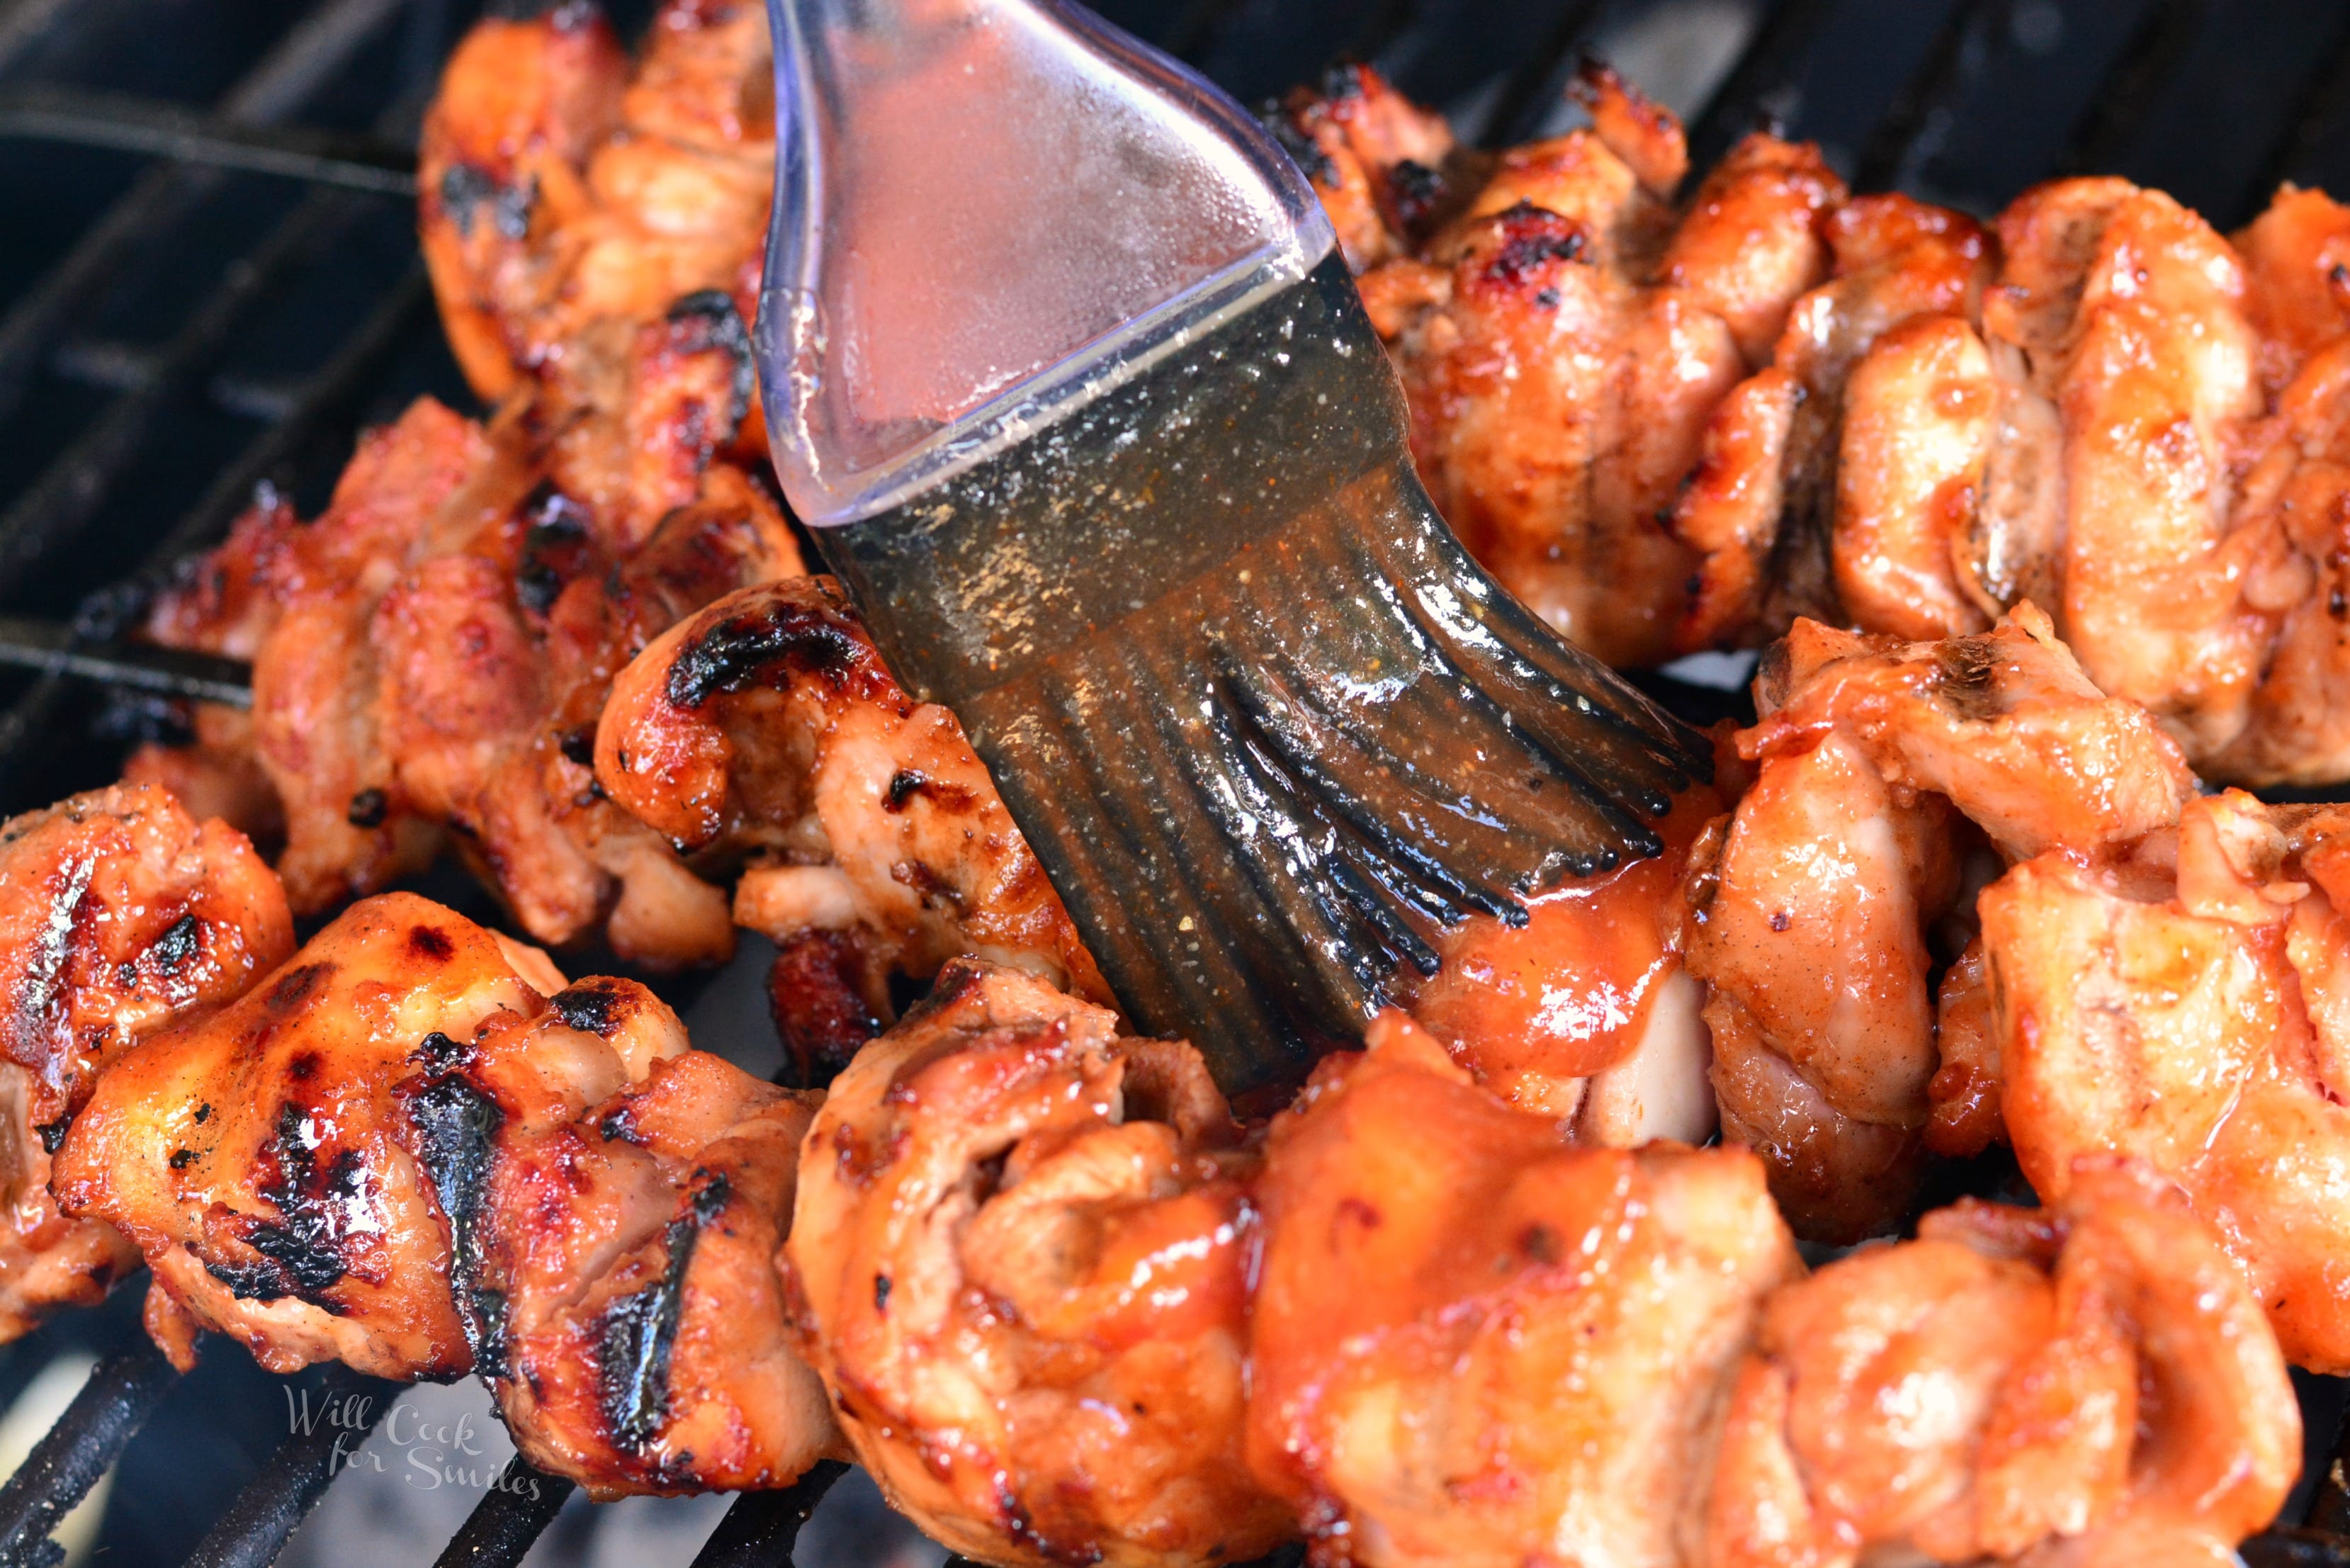 brushing Spicy BBQ sauce on Chicken Skewers 